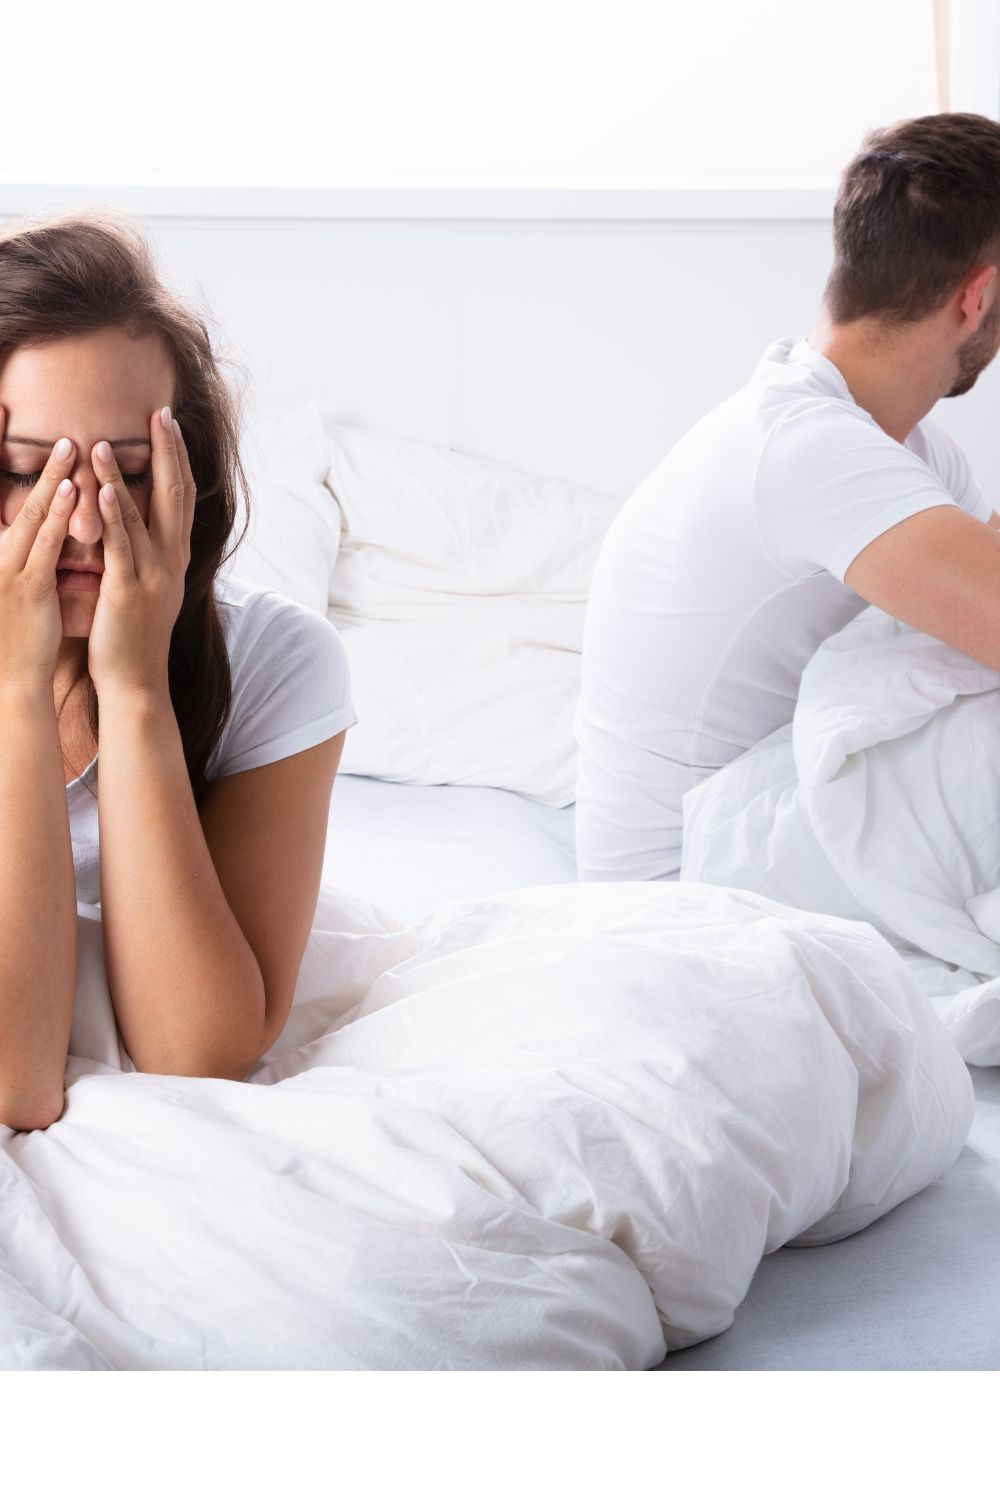 8 Reasons Married Women Lose Interest In Their Husbands Life And Love